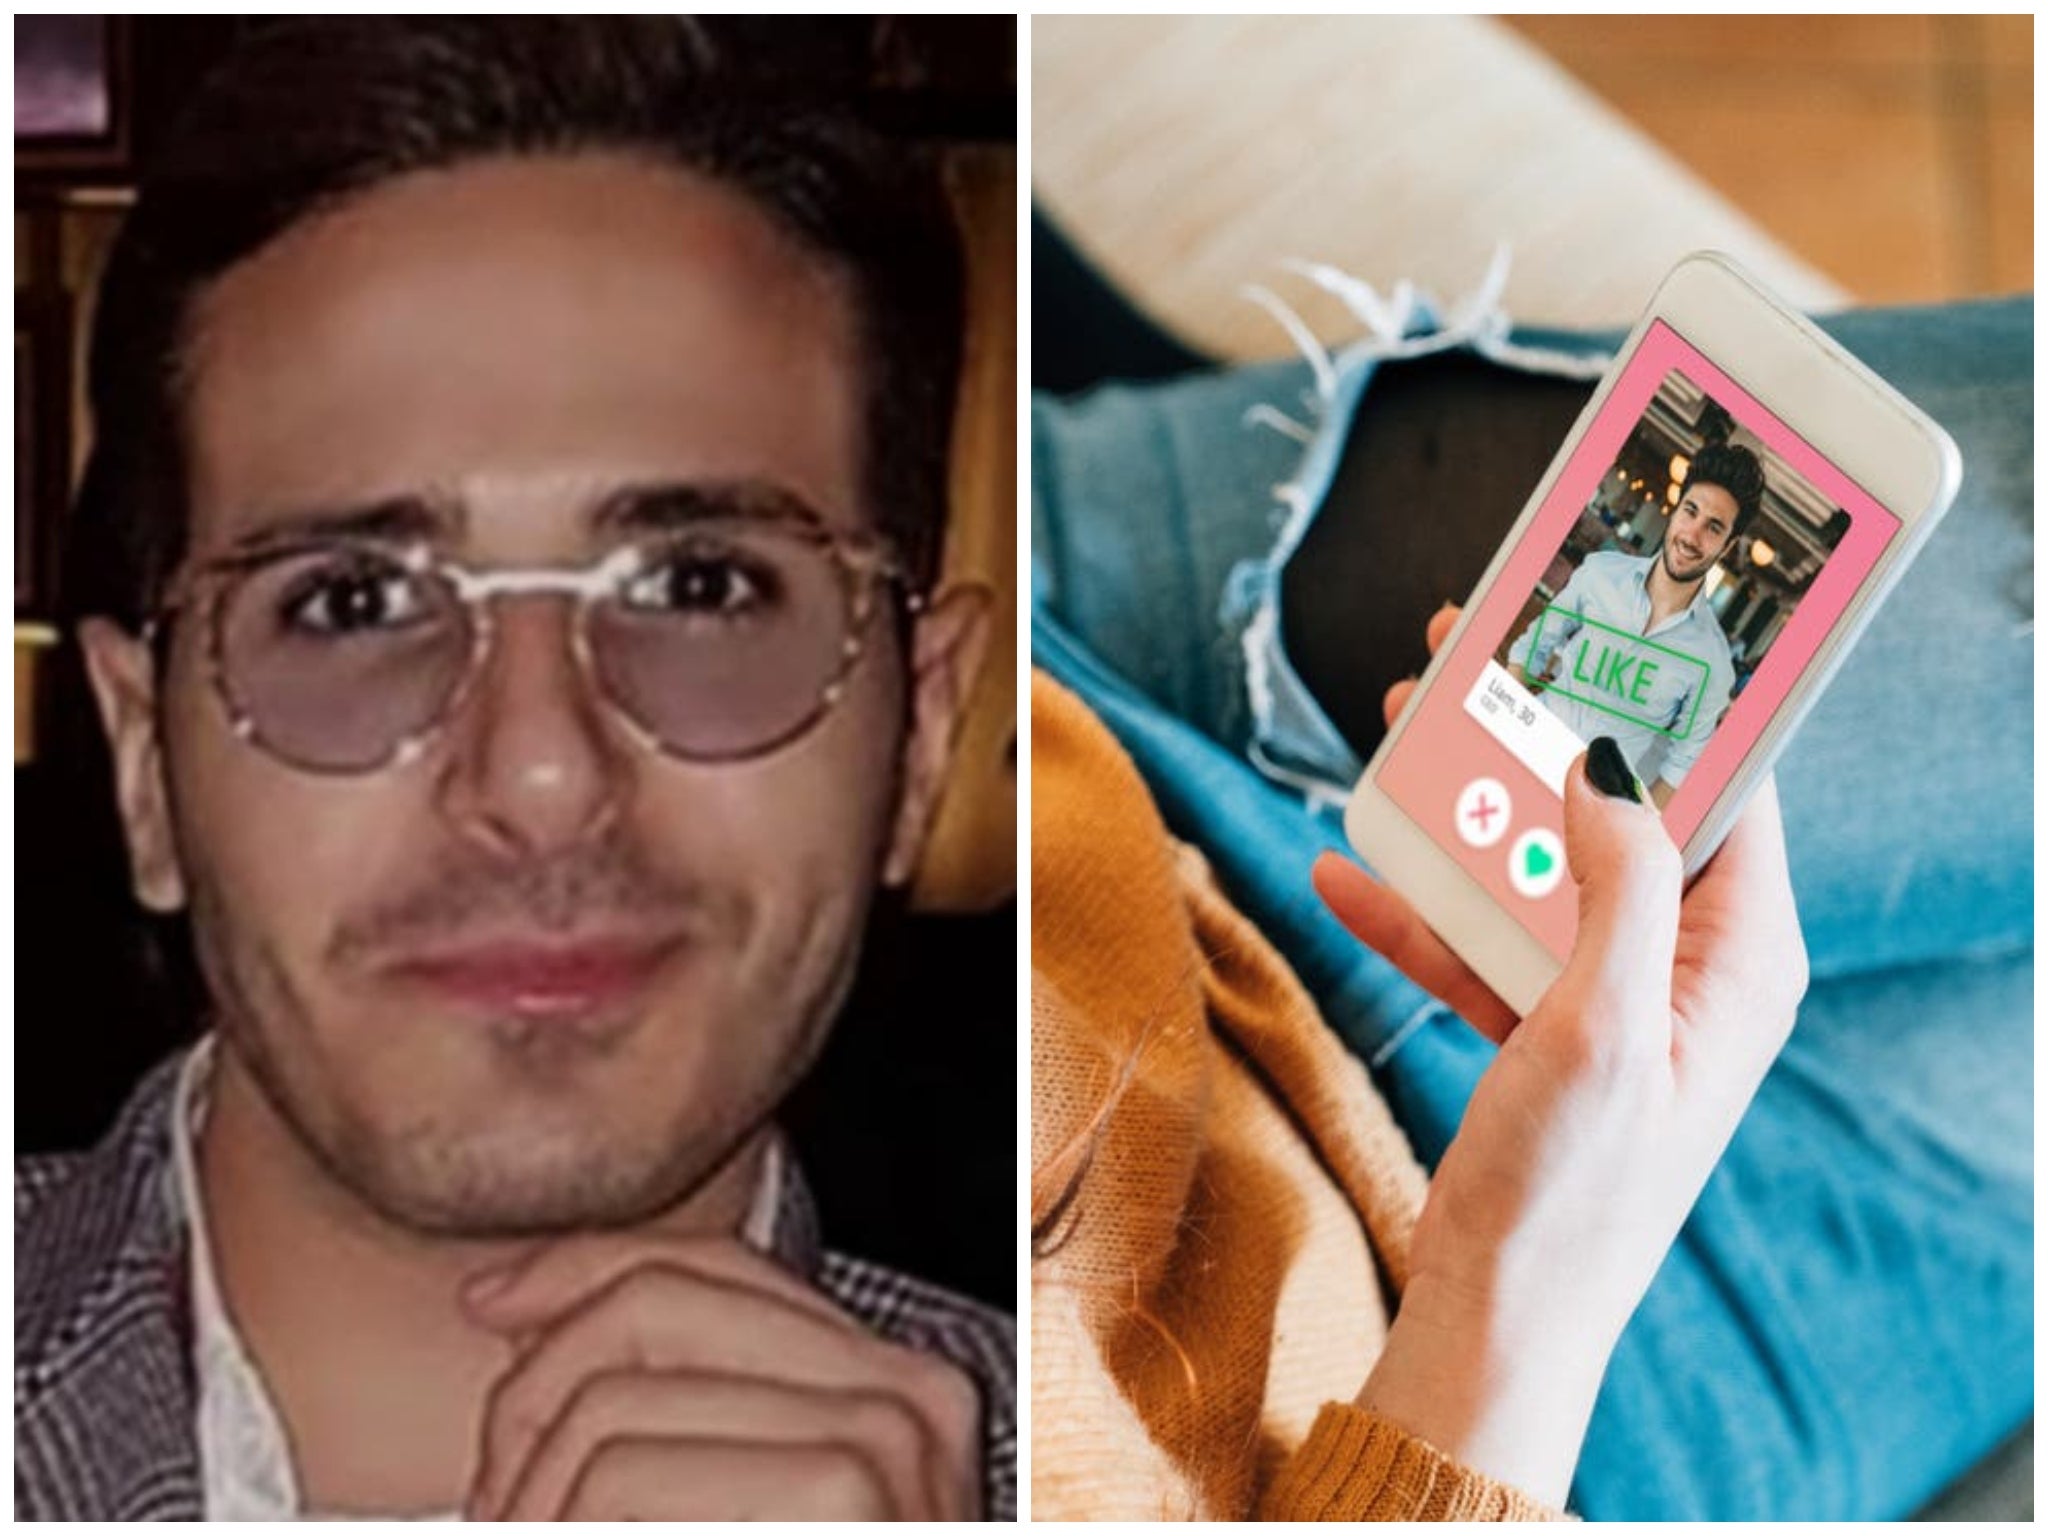 The Tinder Swindler stole an estimated total of $10 million from women he met online